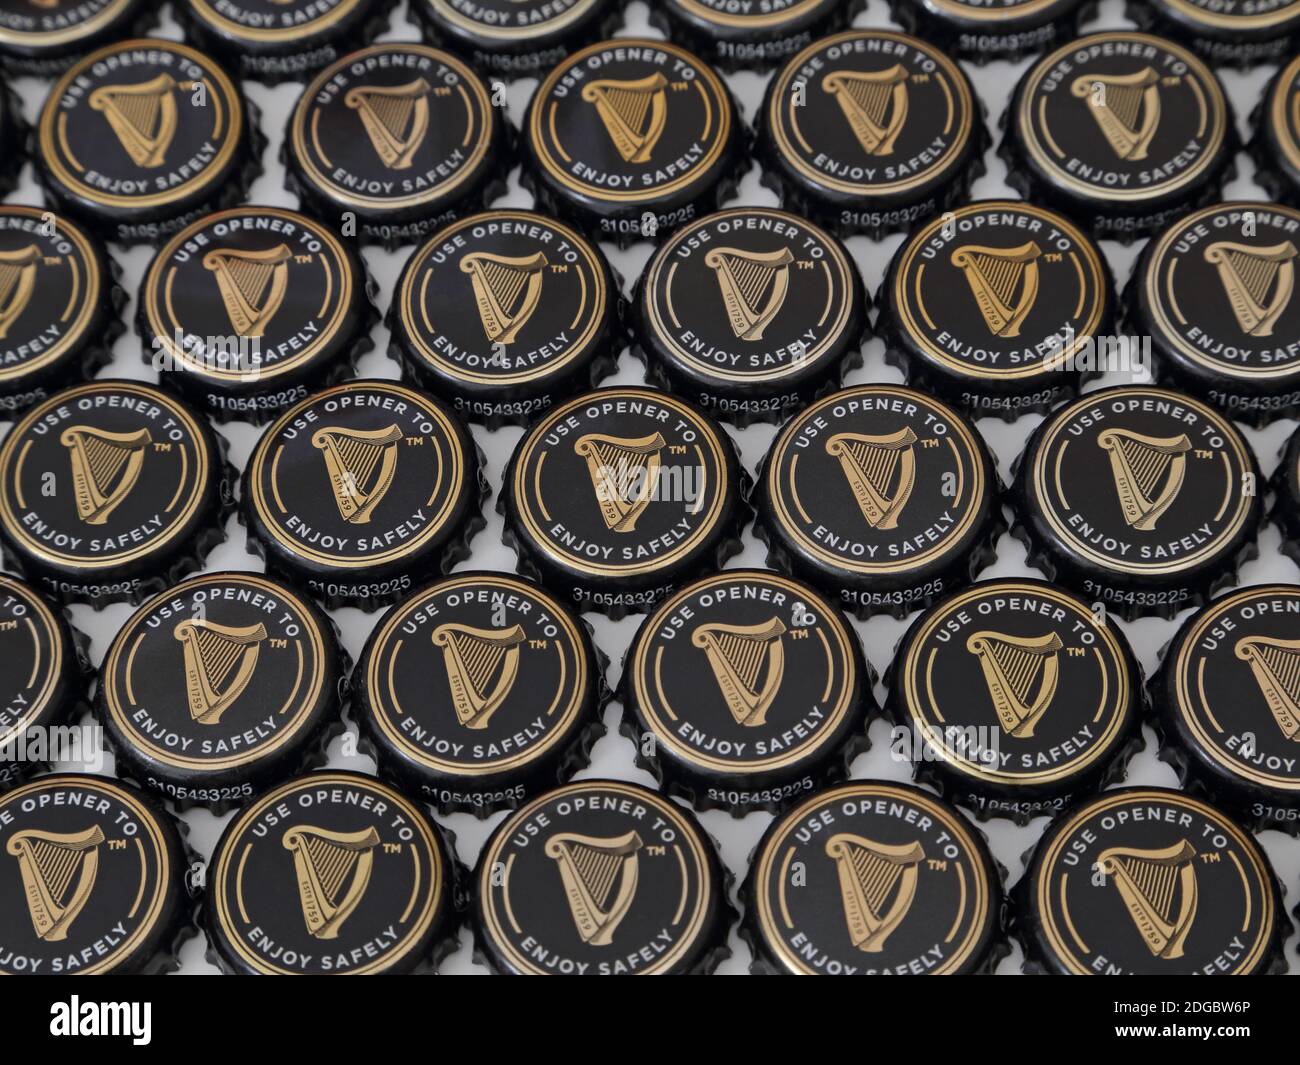 A collection of Guinness beer bottles caps are shown arranged in a flat display, viewed at an angle in the 2020s. For editorial uses only. Stock Photo